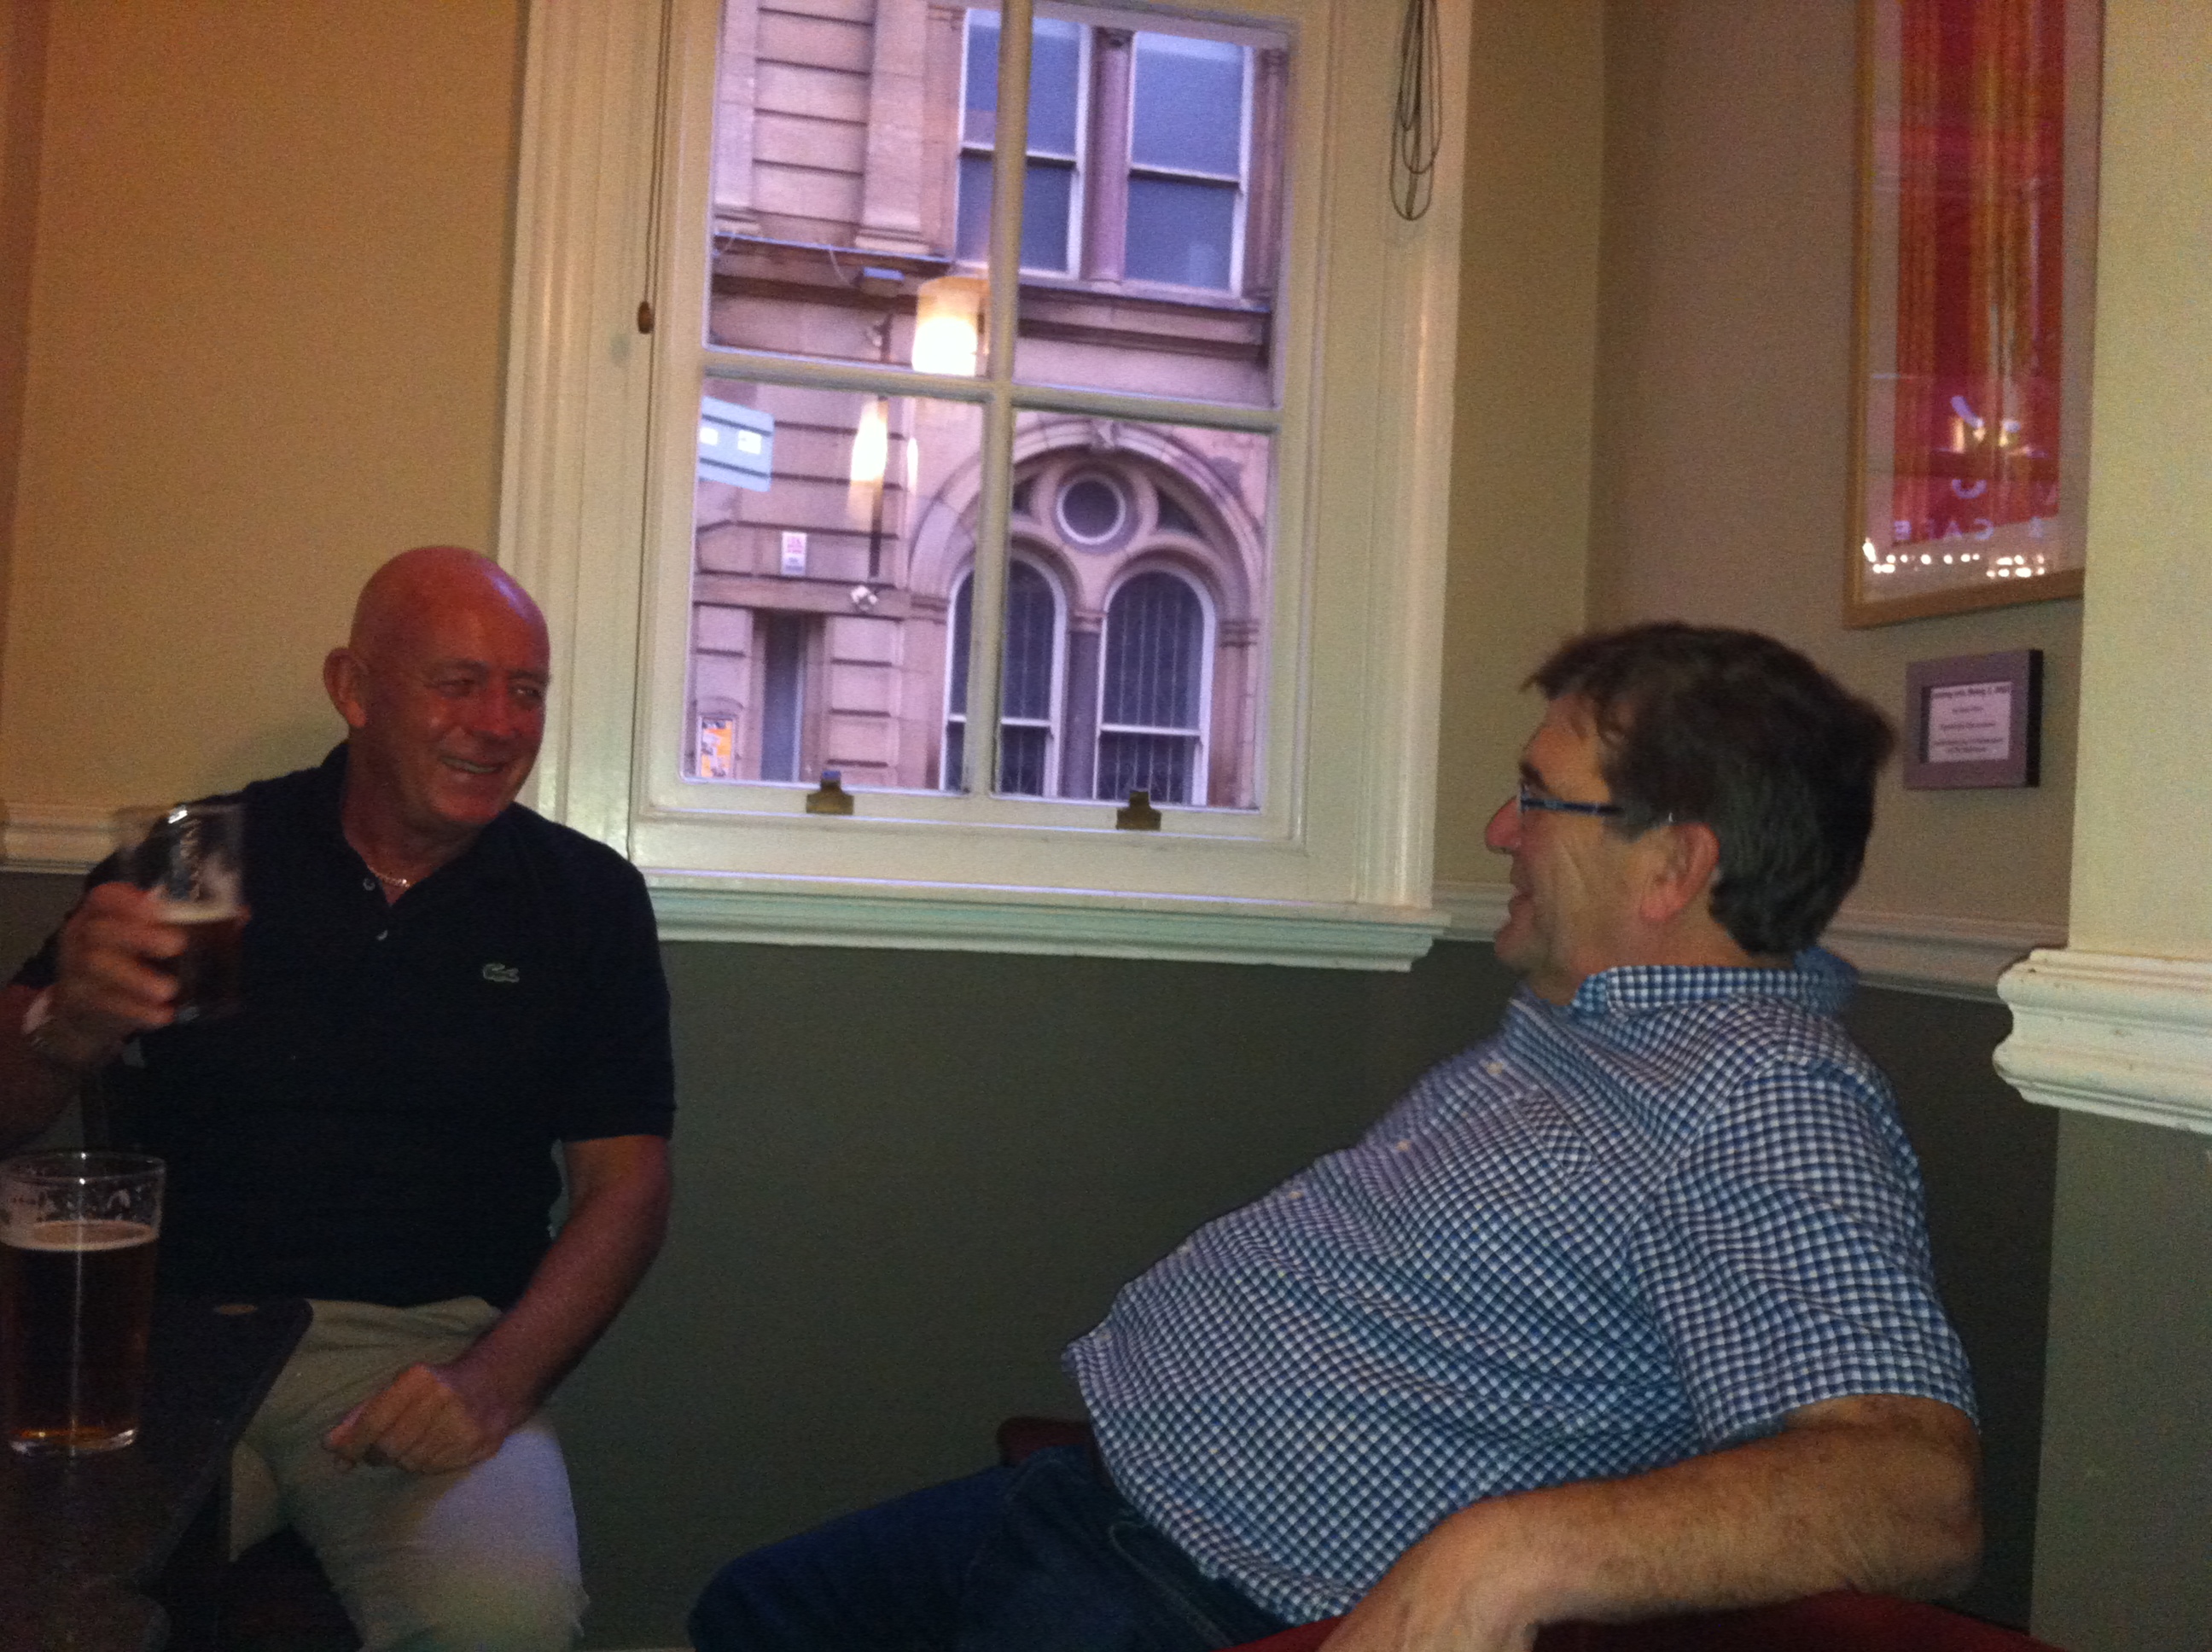 Vinny Collins, deliriously happy at being just back from Barbados, or (more likely) sharing a joke with Stuart Cameron